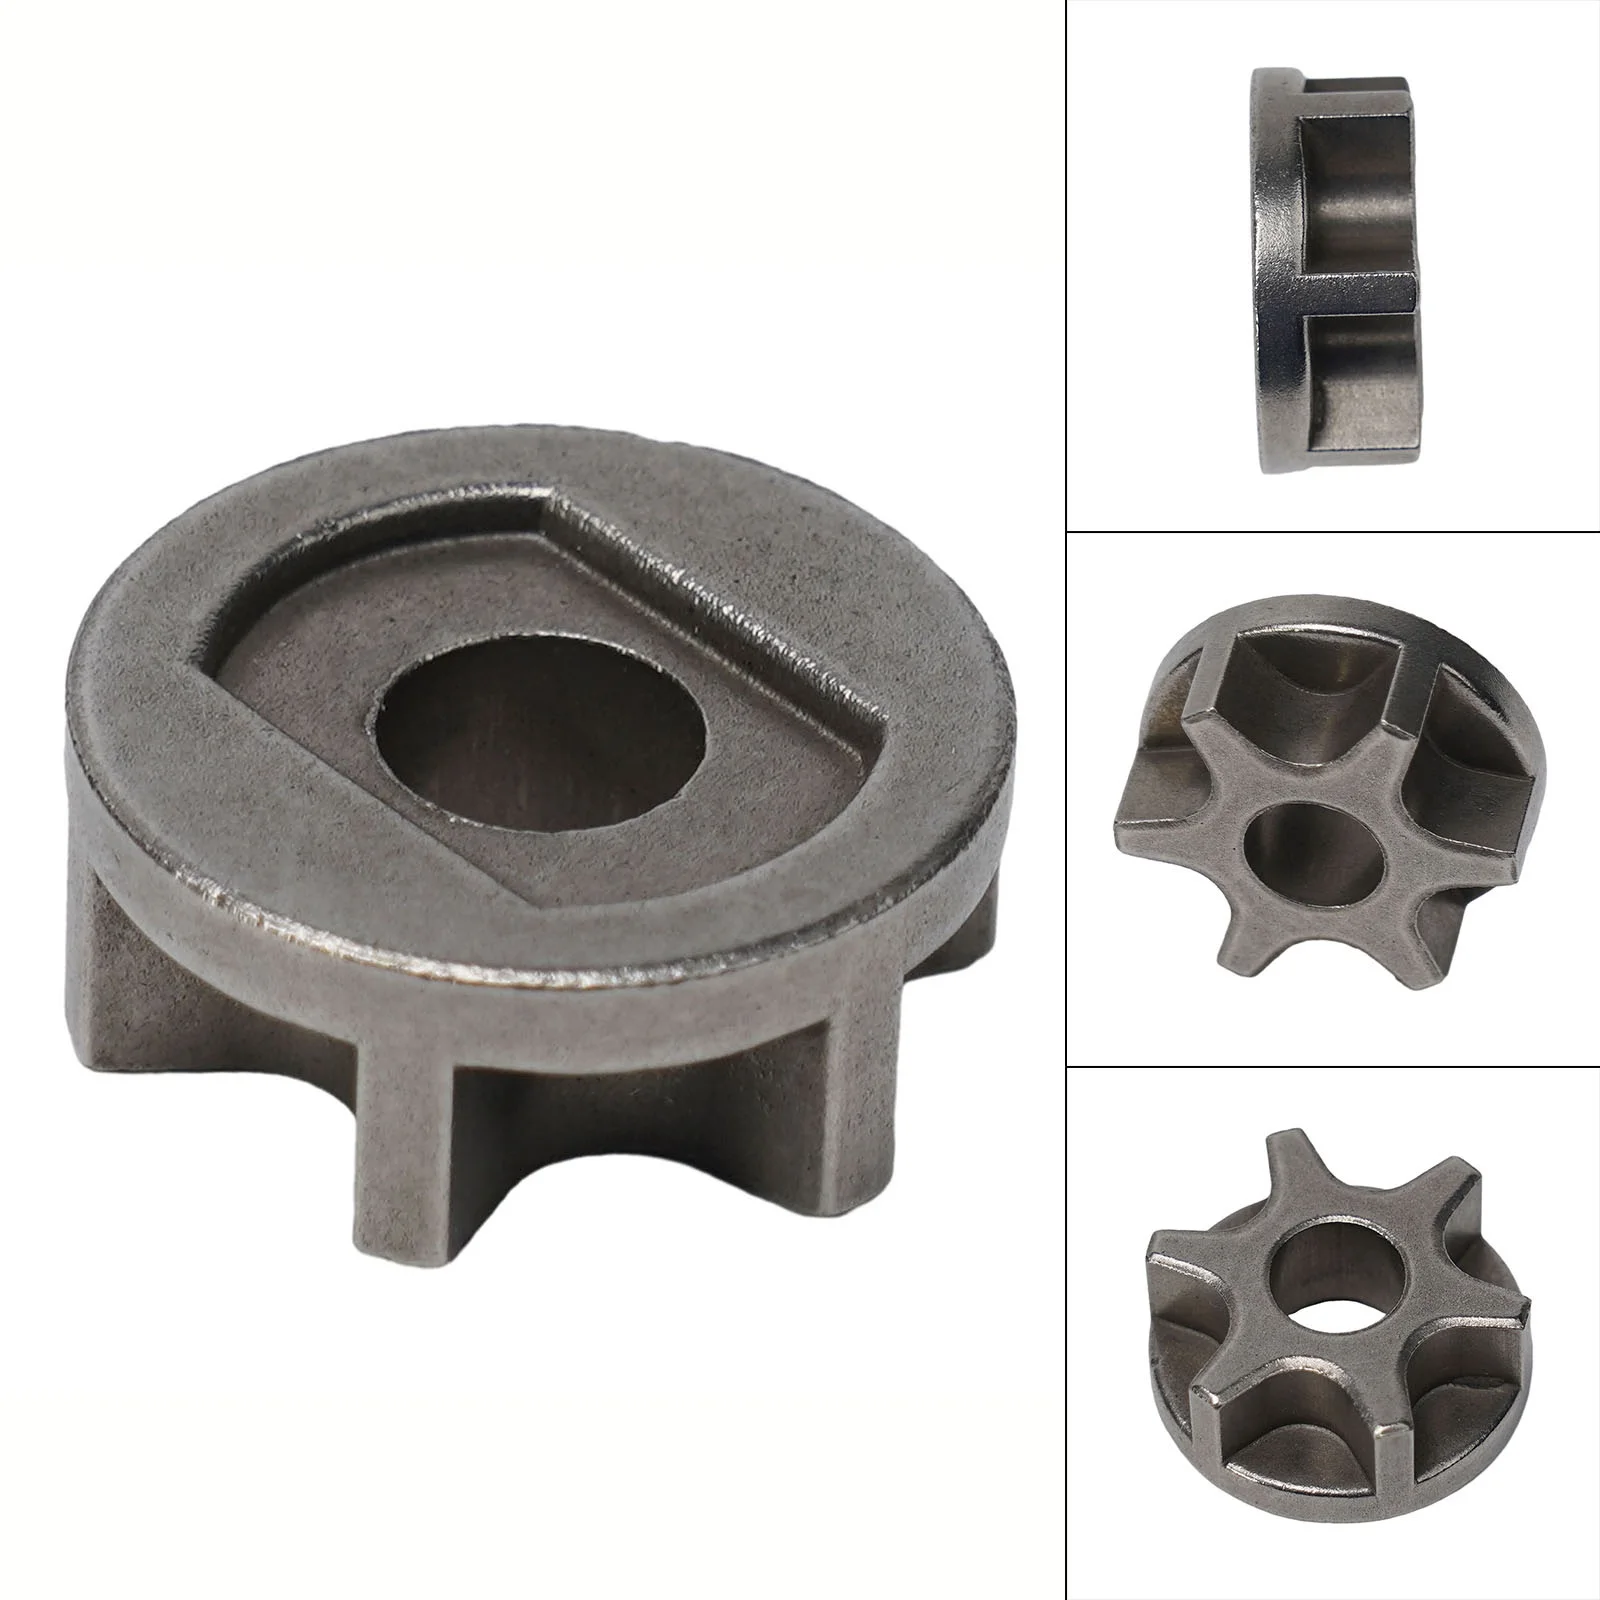 For M10-100 Angle Grinder Accessory Angle Grinder Gear Durable High Speed Steel Chain Saw M10 M14 M16 High Quality durable high quality replacement apron welding 100 65cm accessory acid resistance good antifouling polyurethane